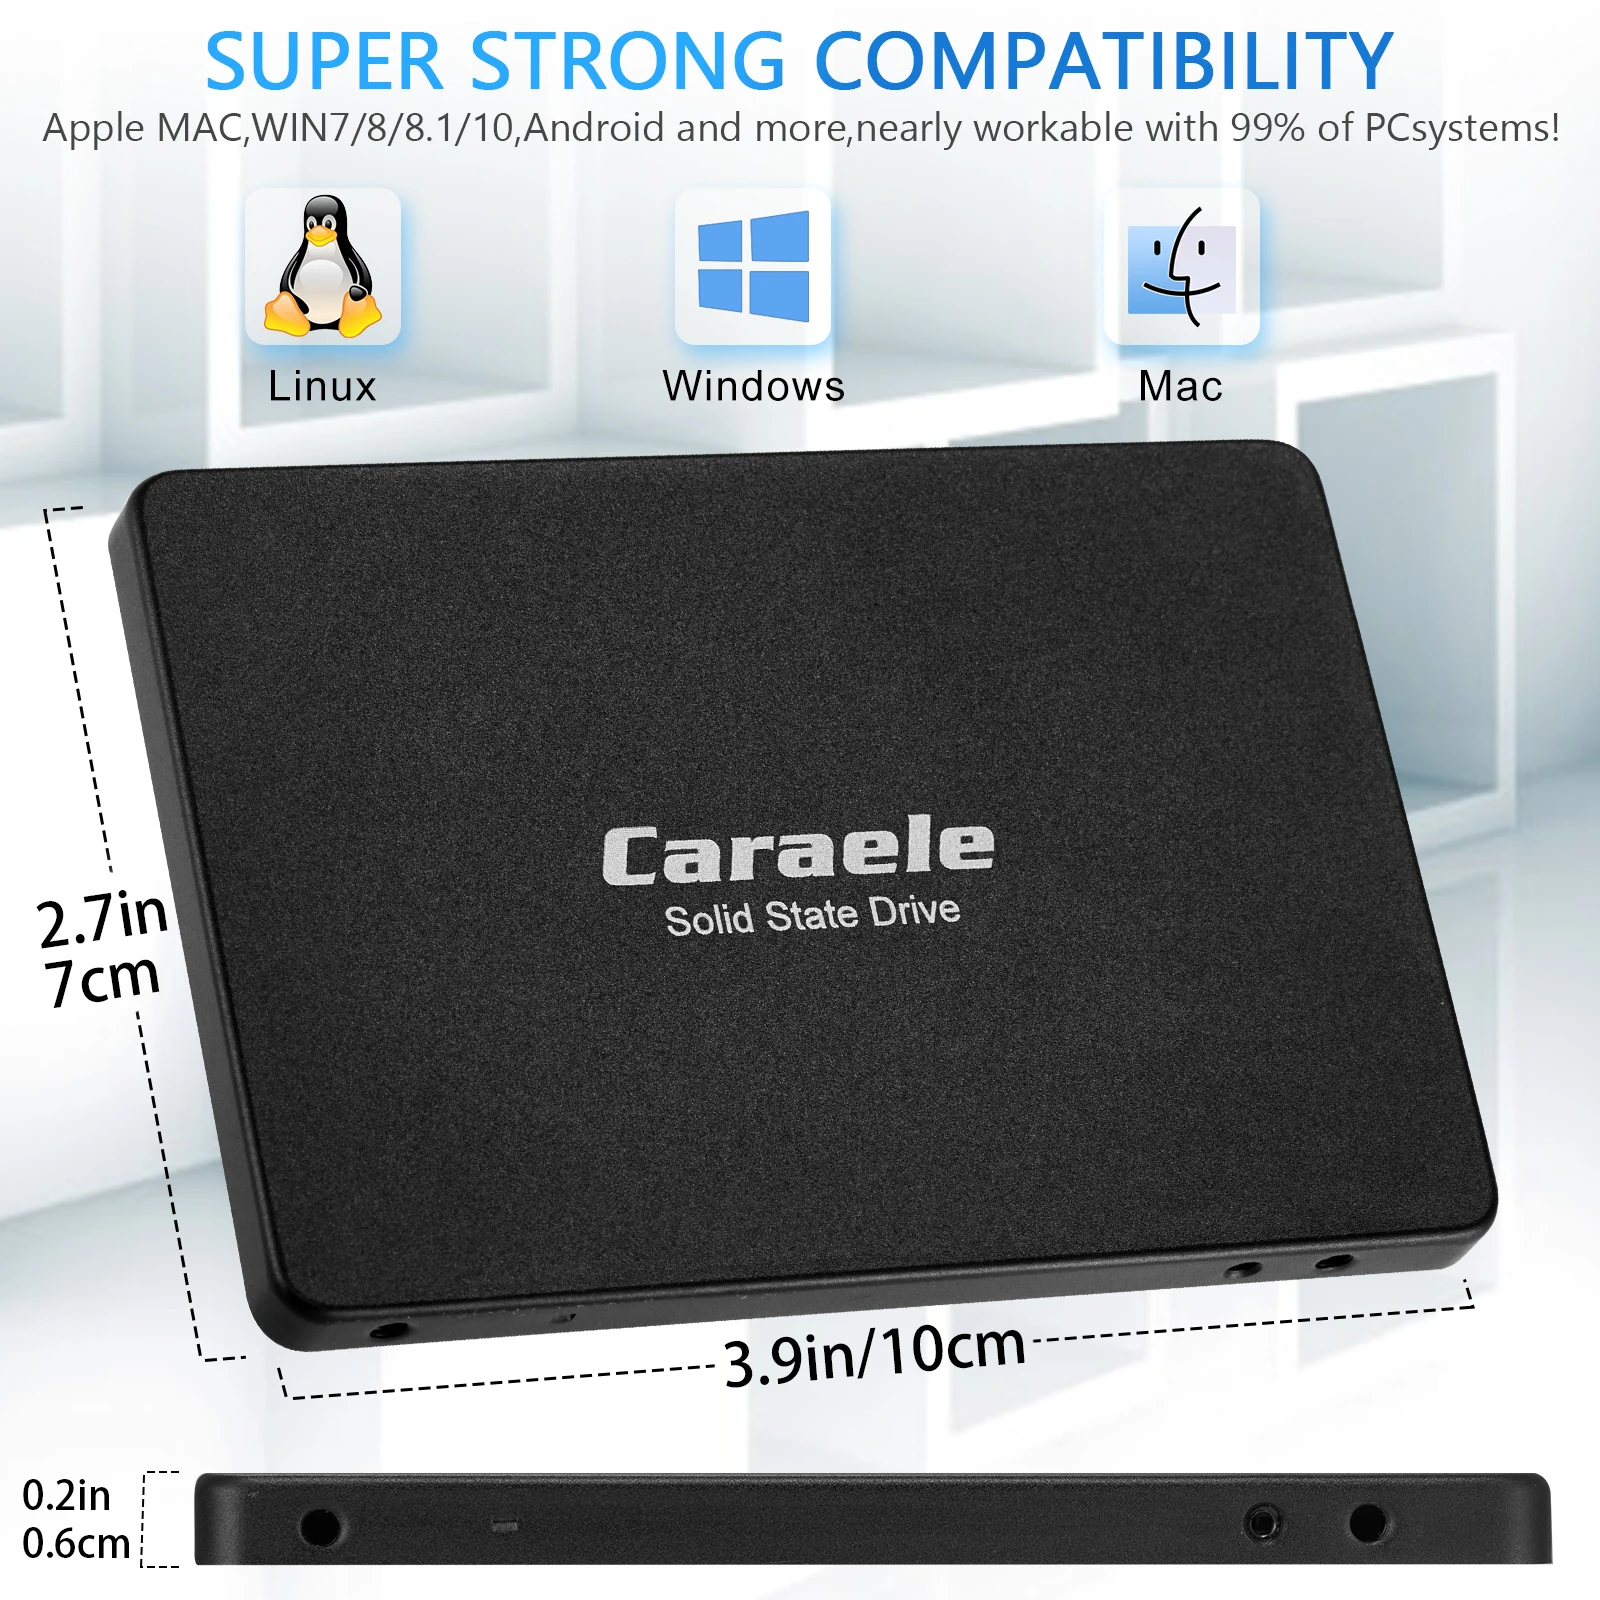 Caraele K500 2.5 INCH Internal Solid State Drives Storage Devices SATA III SSD 512GB 1TB SSD HARD Drive for Laptops,Computer,PC enlarge